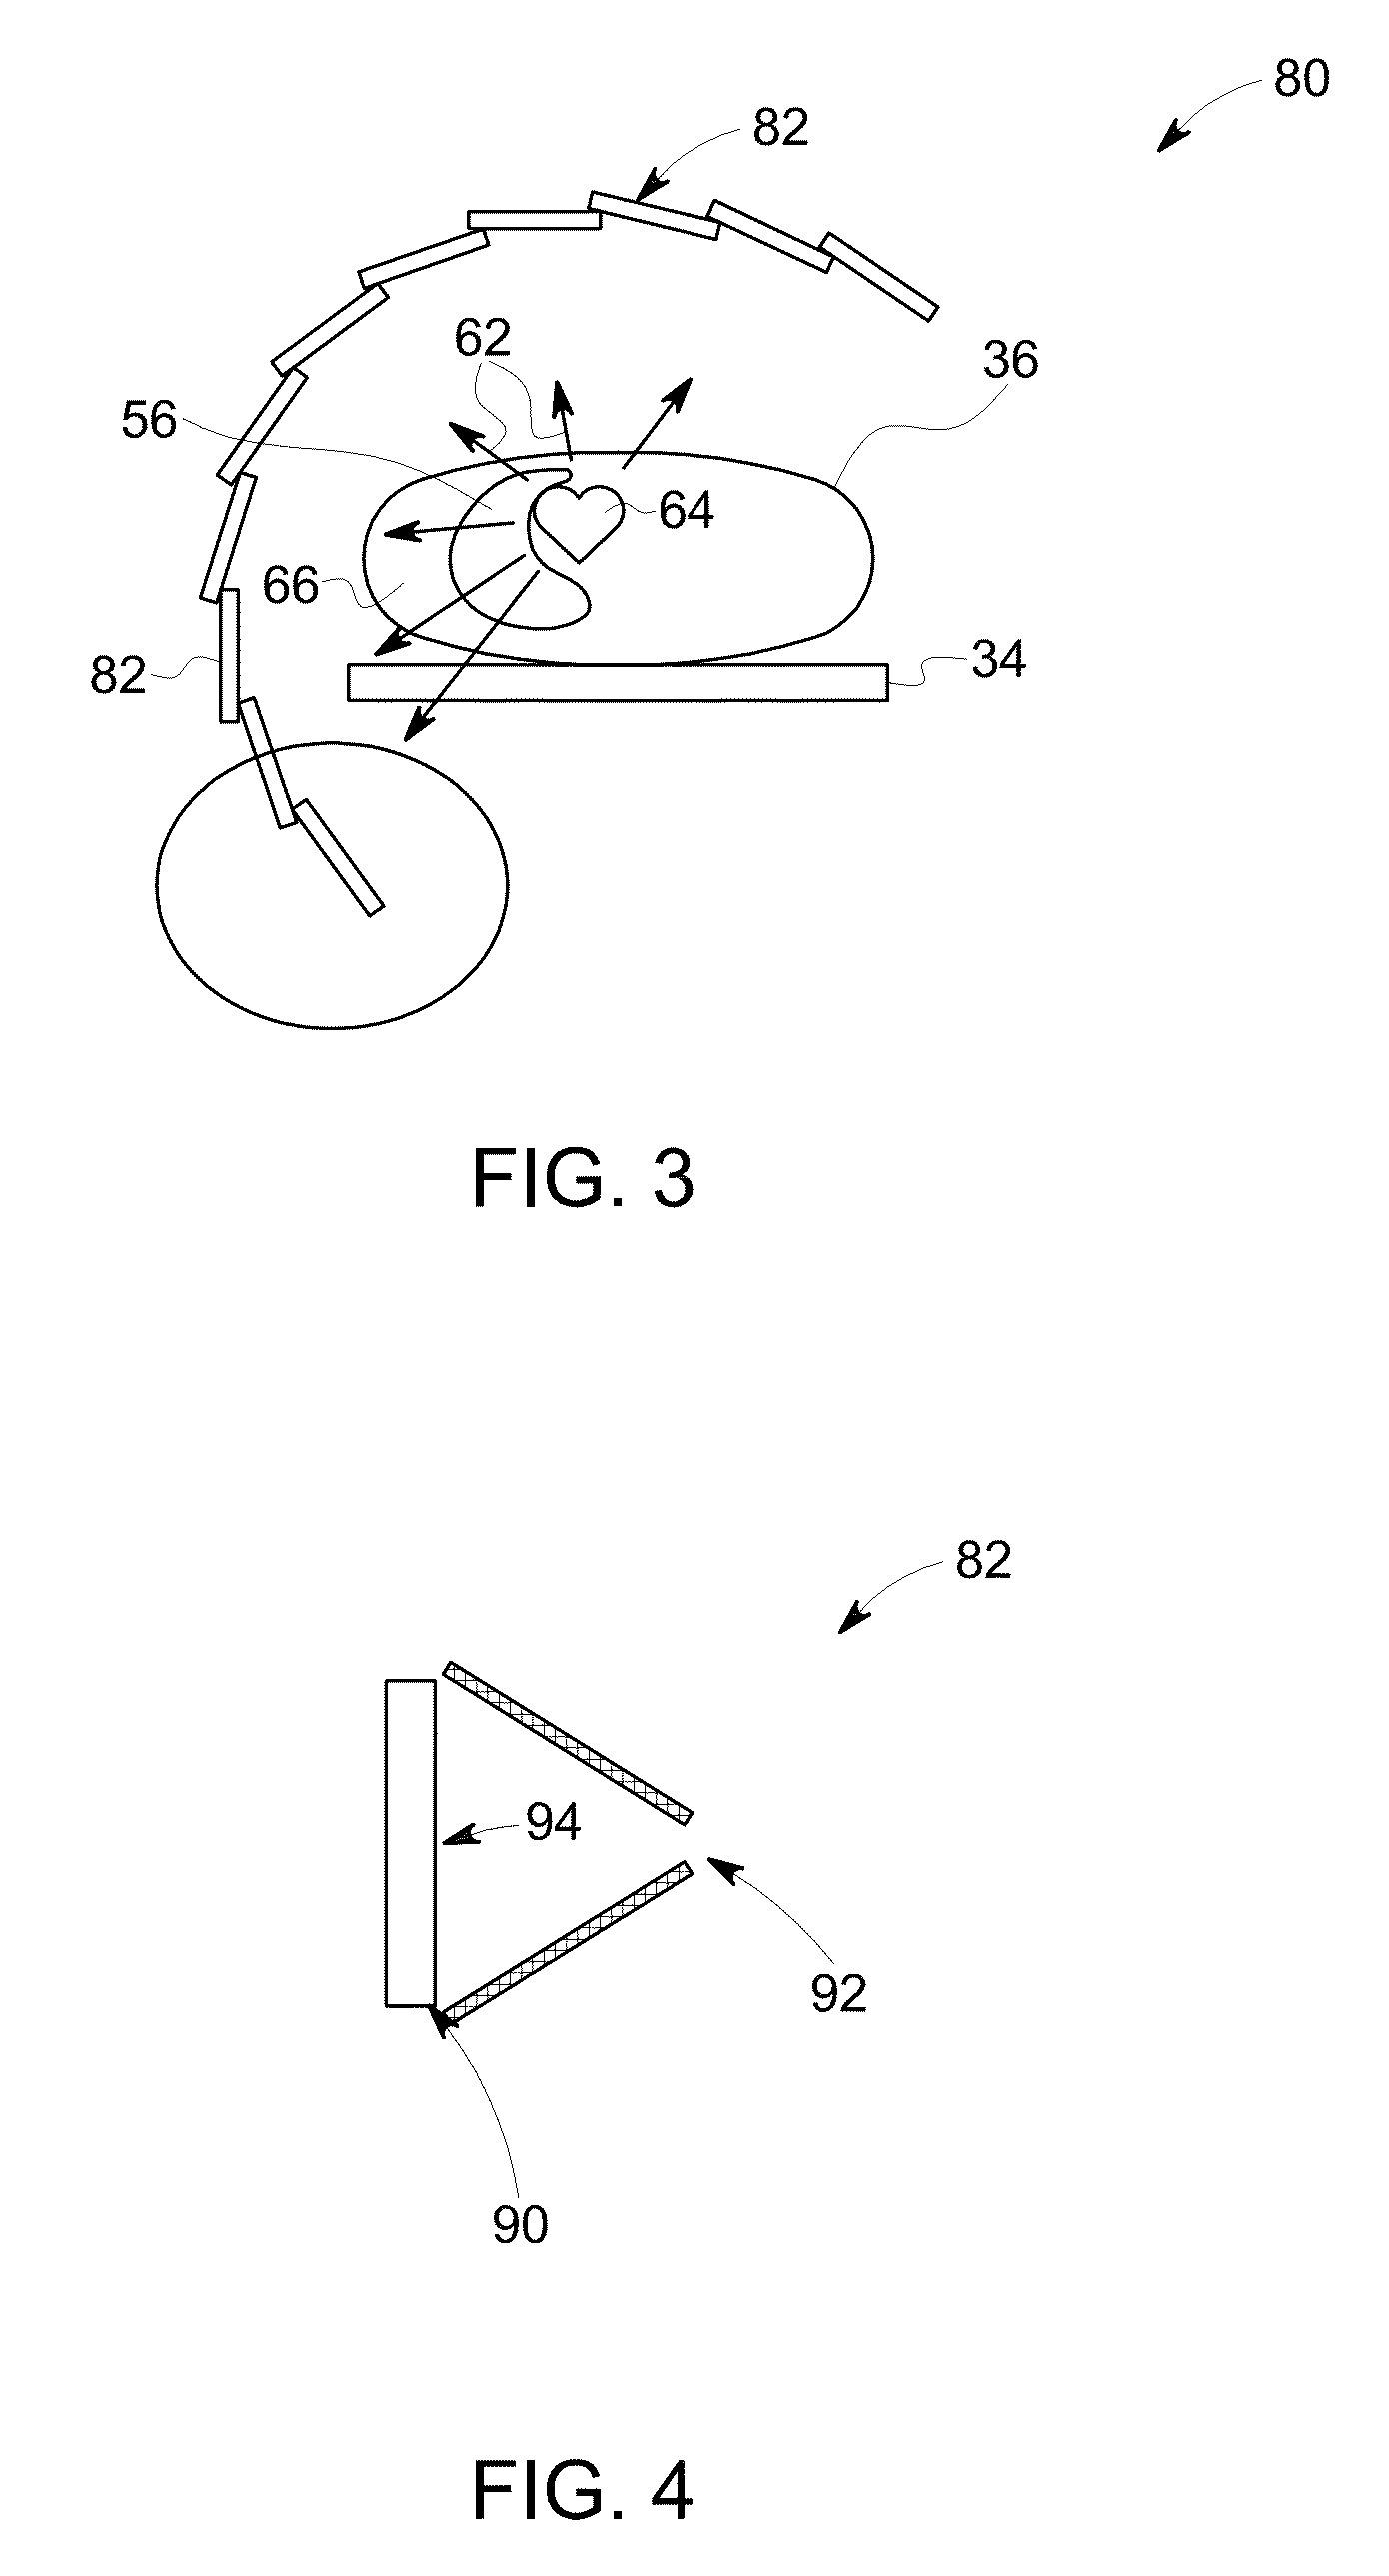 Systems and methods for attenuation compensation in nuclear medicine imaging based on emission data